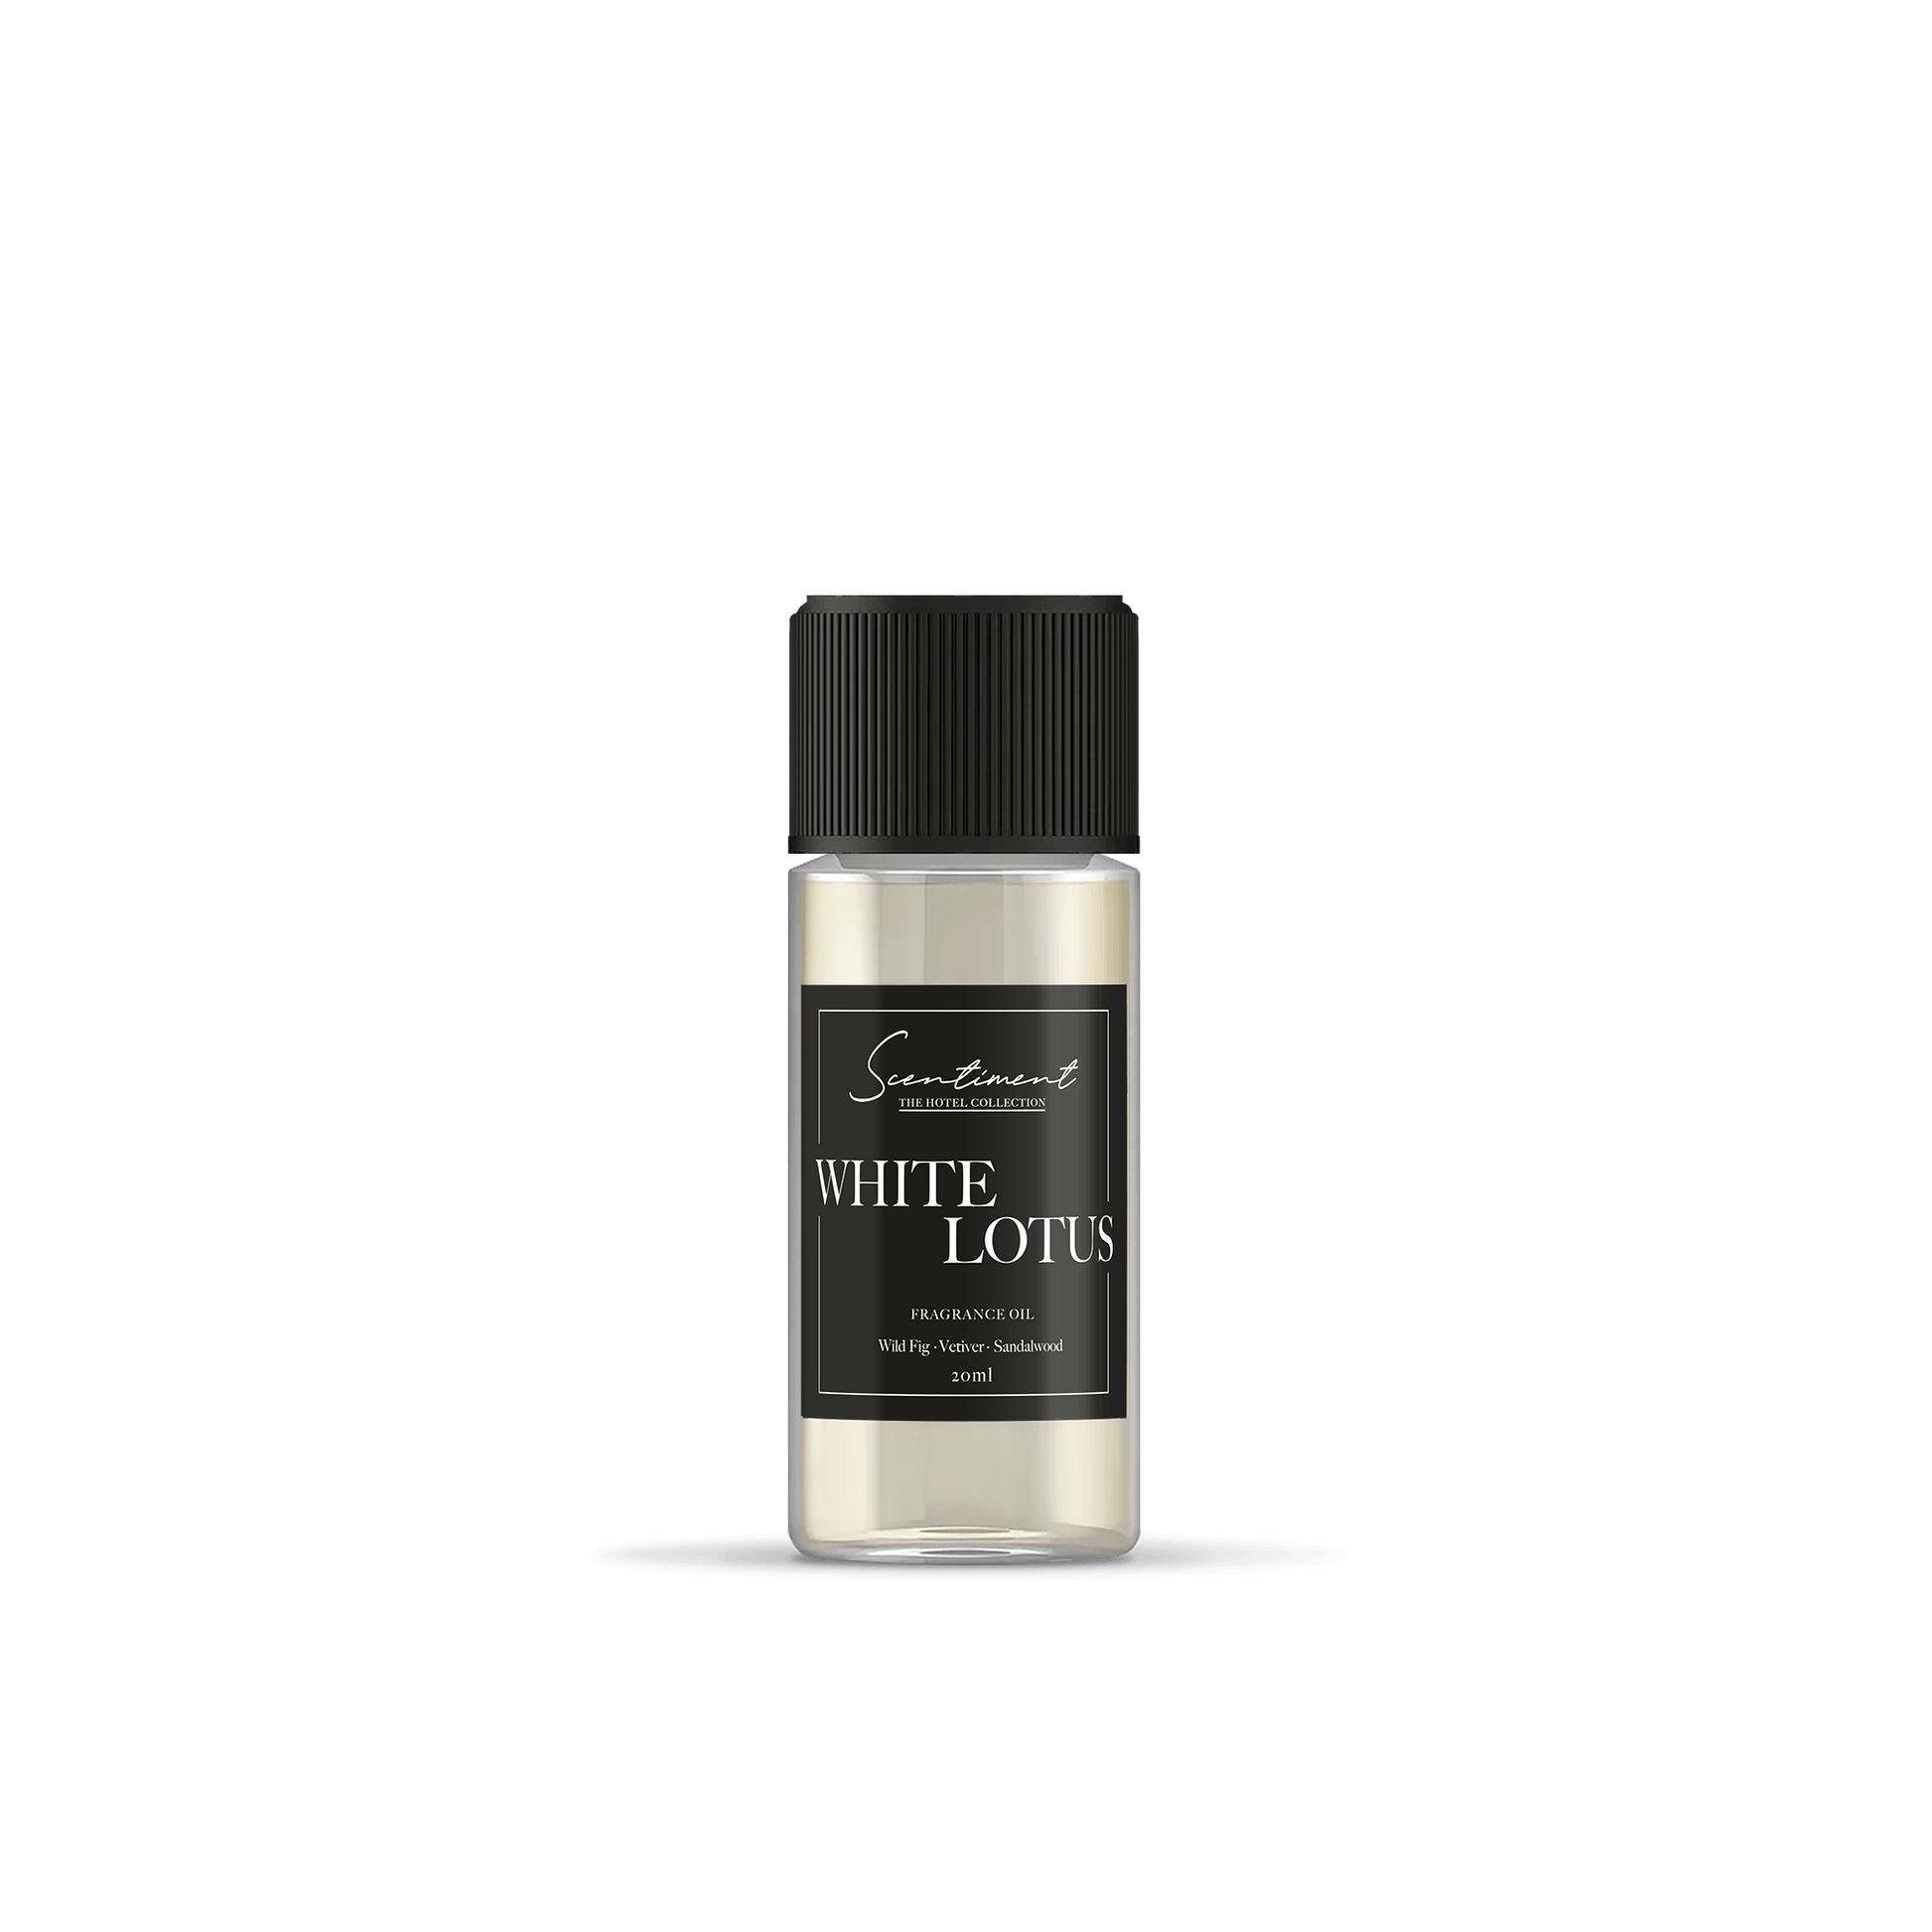 White Lotus Fragrance Oil inspired by the Four Seasons® with notes of Wild Fig, Vetiver, and Sandalwood.